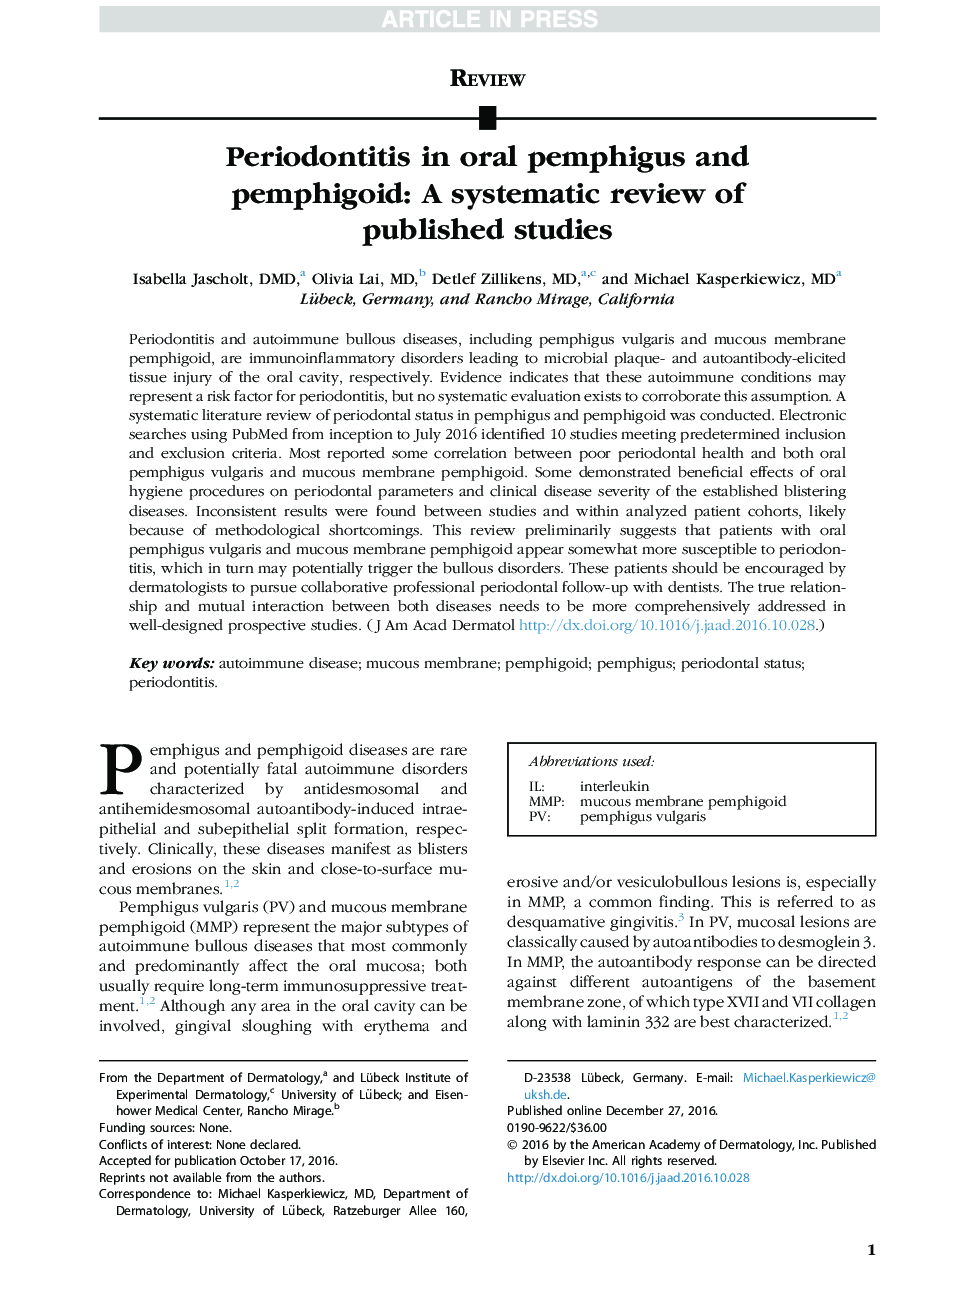 Periodontitis in oral pemphigus and pemphigoid: A systematic review of published studies